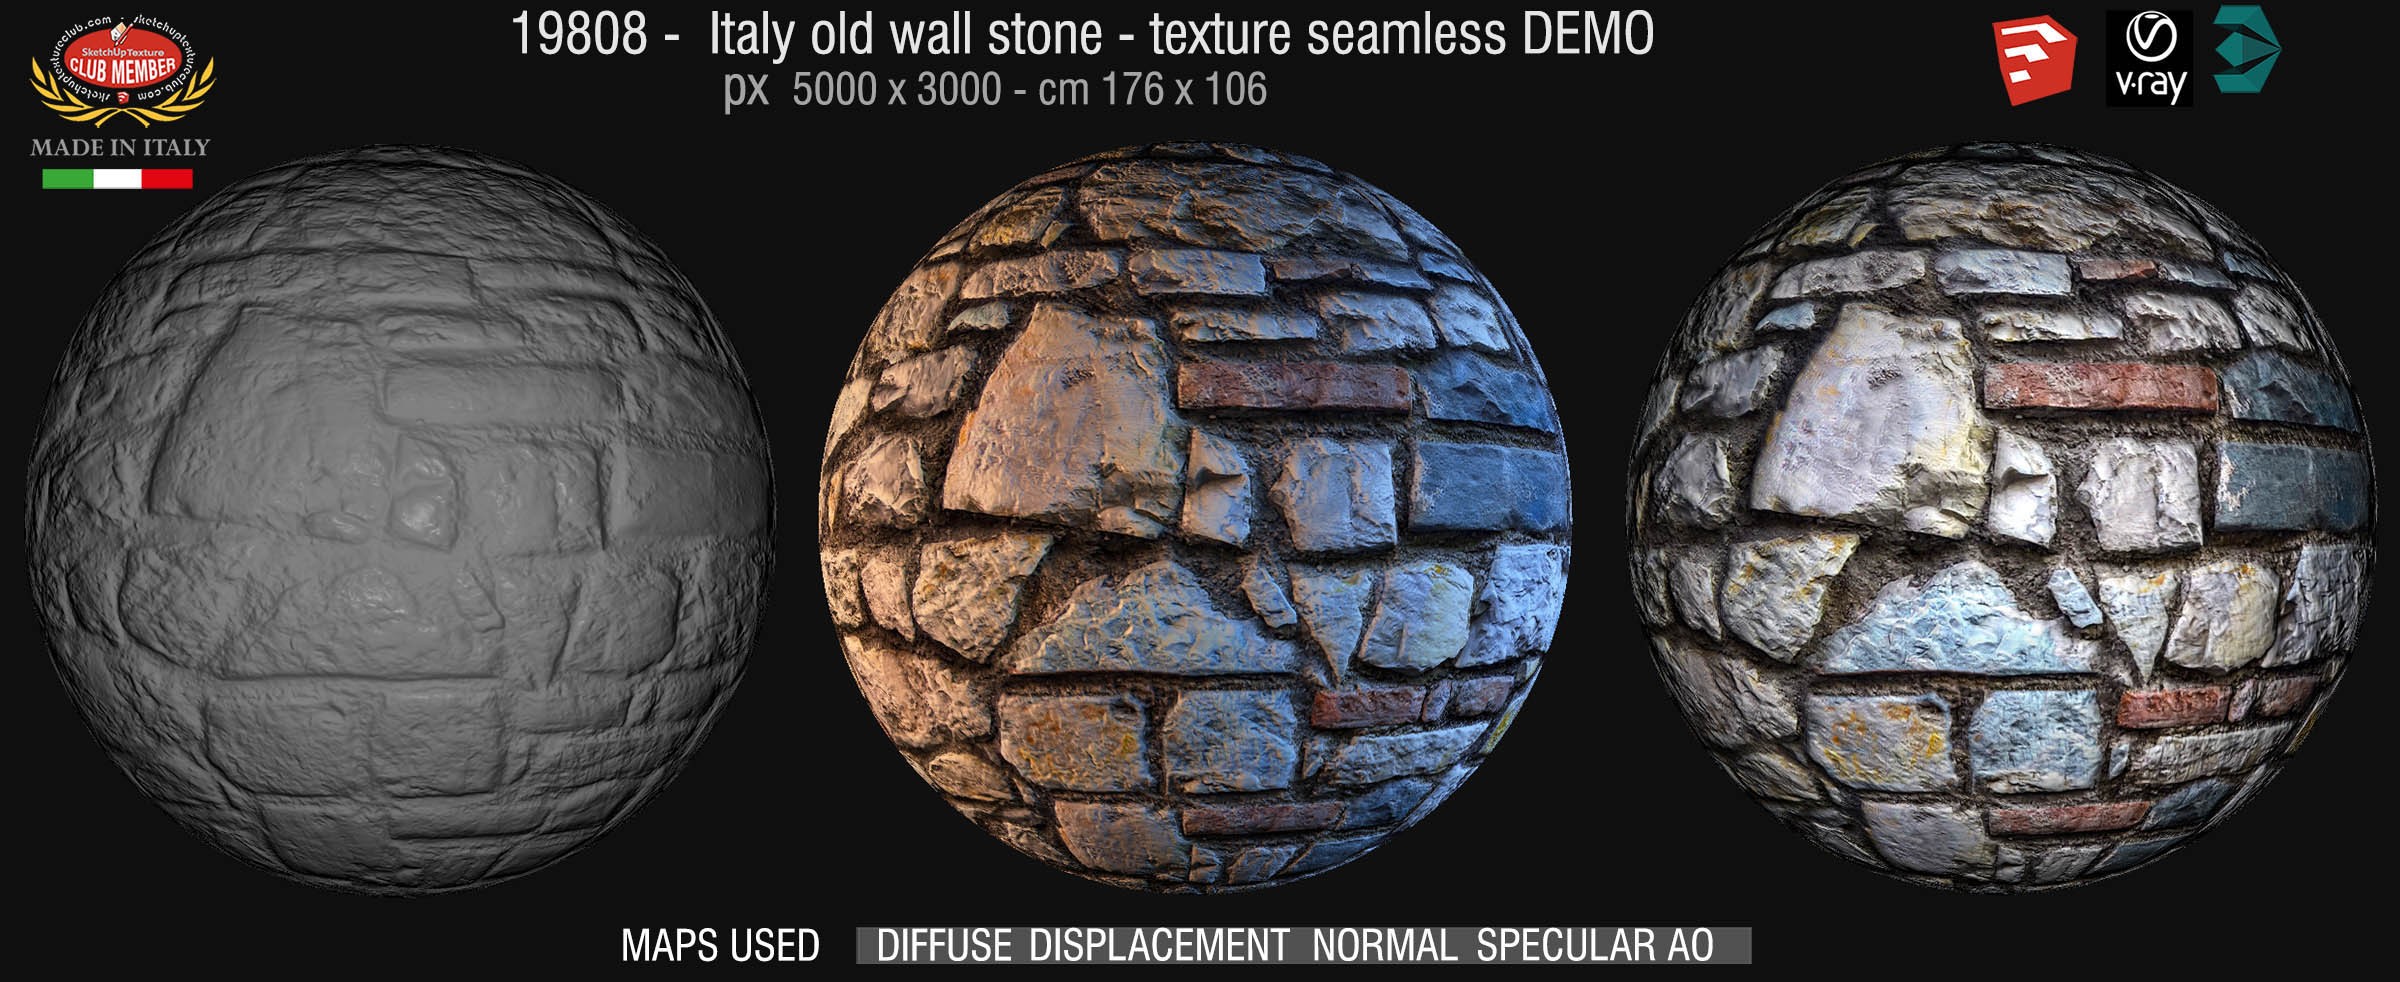 19808 Italy old wall stone texture seamless + maps DEMO